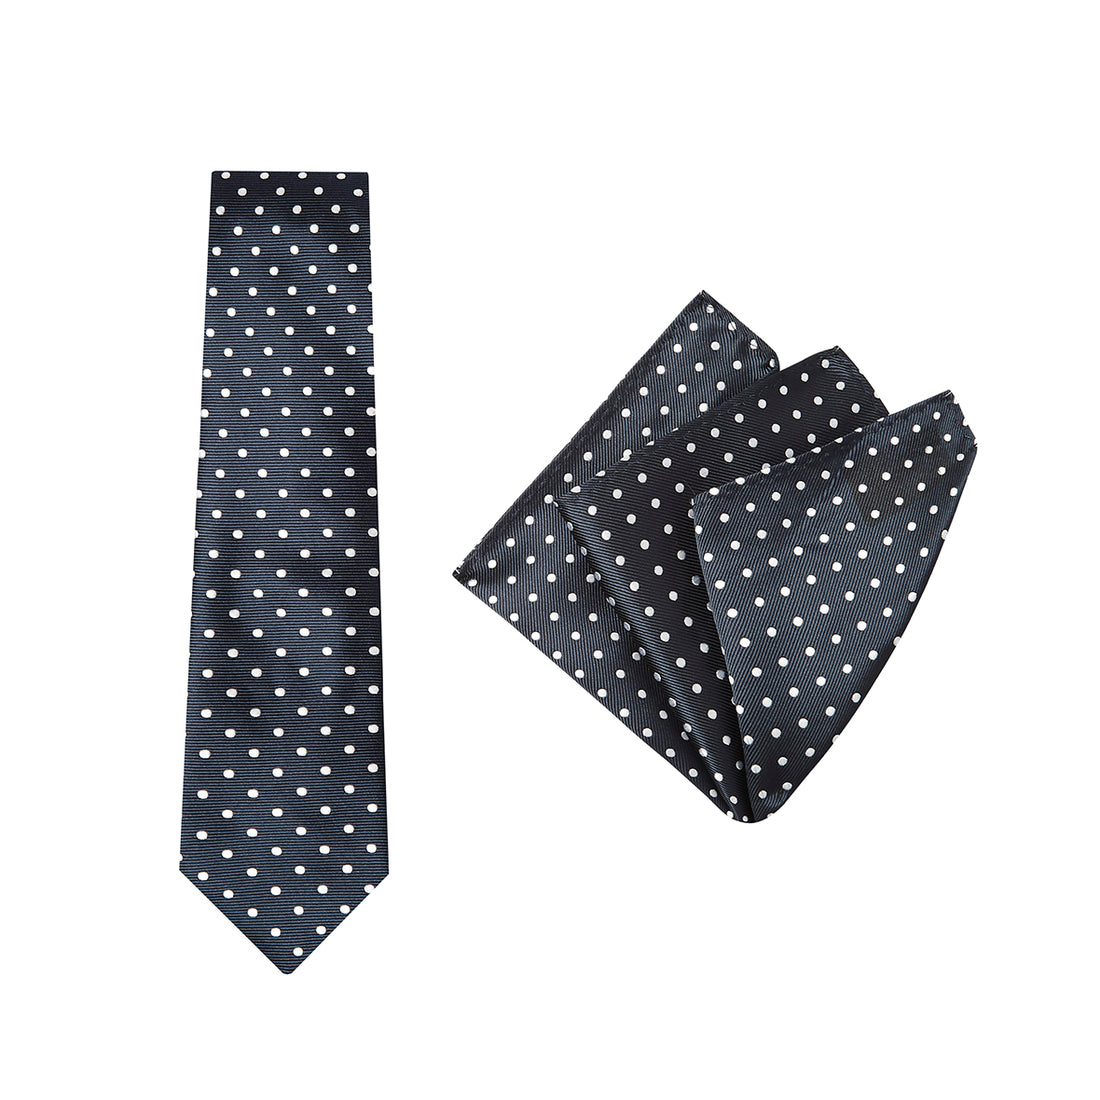 TIE + POCKET SQUARE SET. Spot. Navy. Supplied with matching pocket square.-Ties-PEROZ Accessories